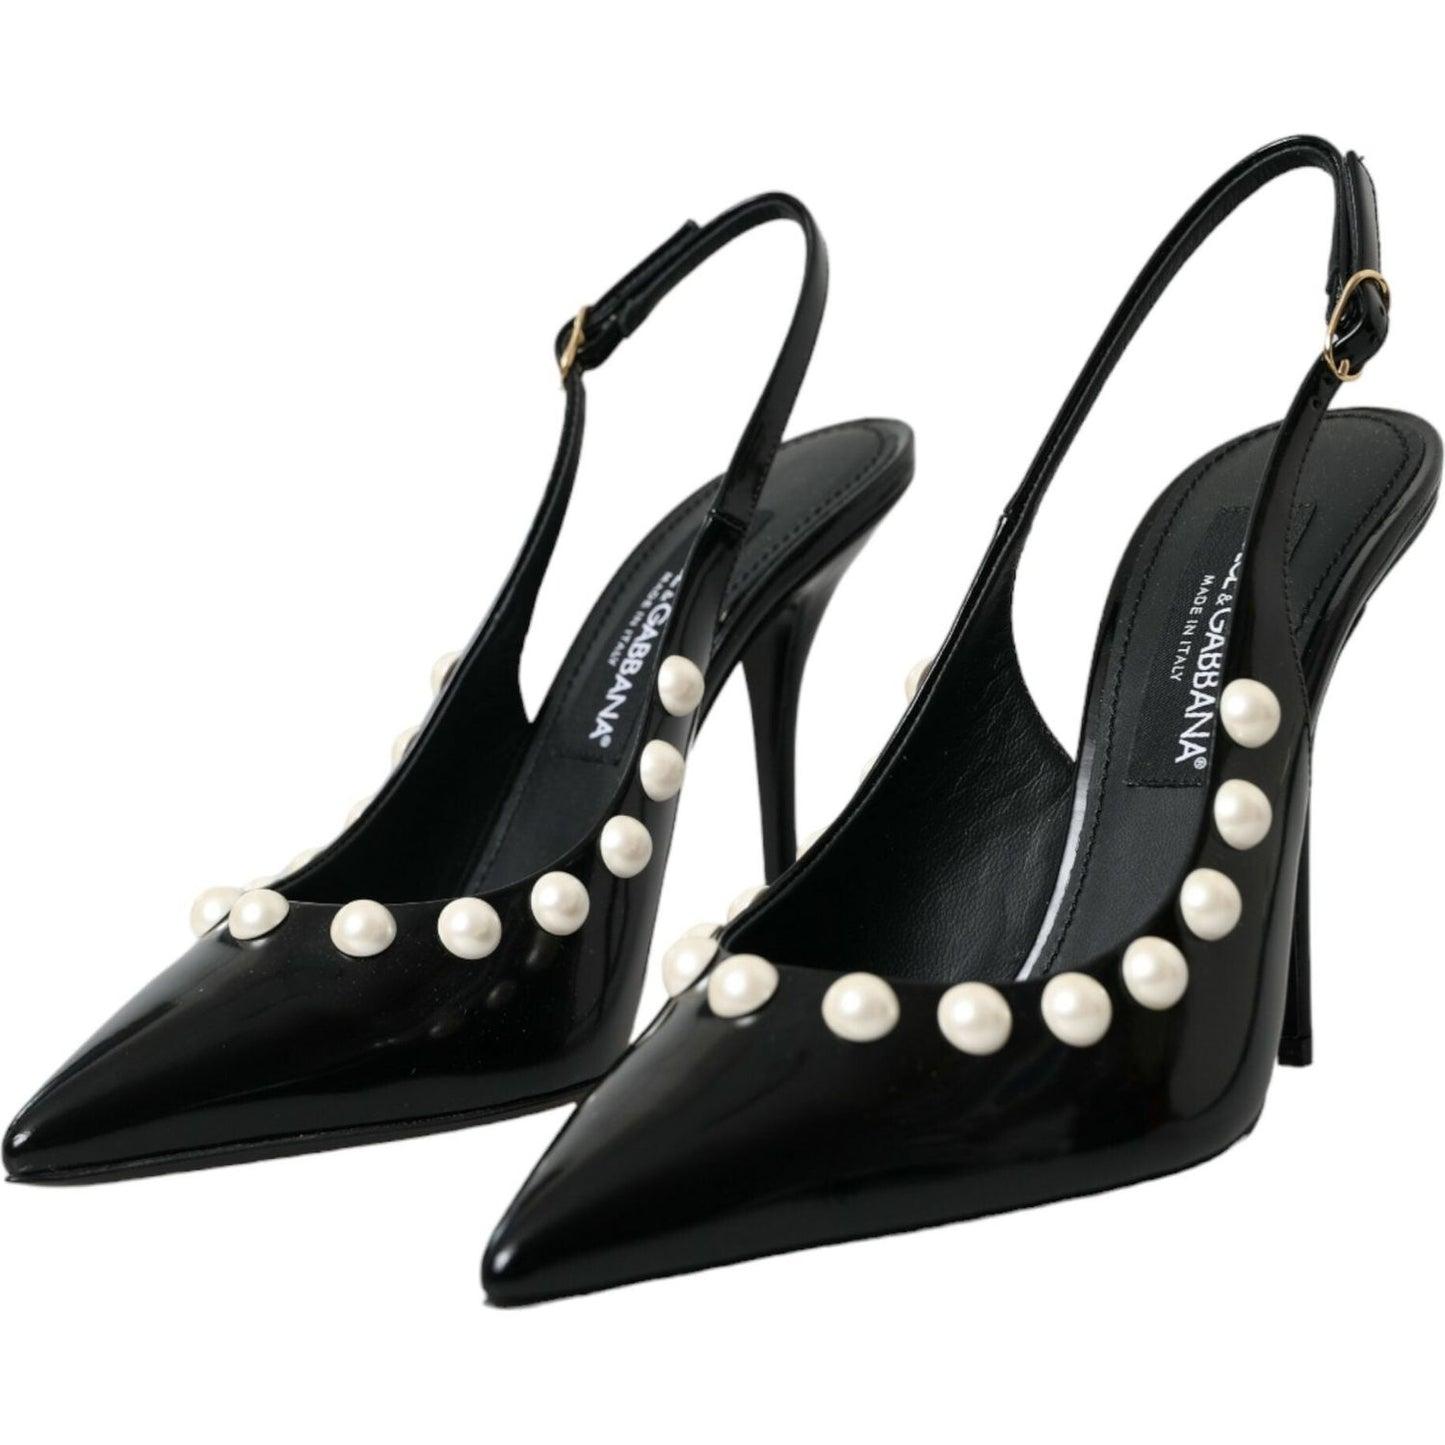 Dolce & Gabbana Black Leather Faux Pearl Heel Slingback Shoes black-leather-faux-pearl-heel-slingback-shoes